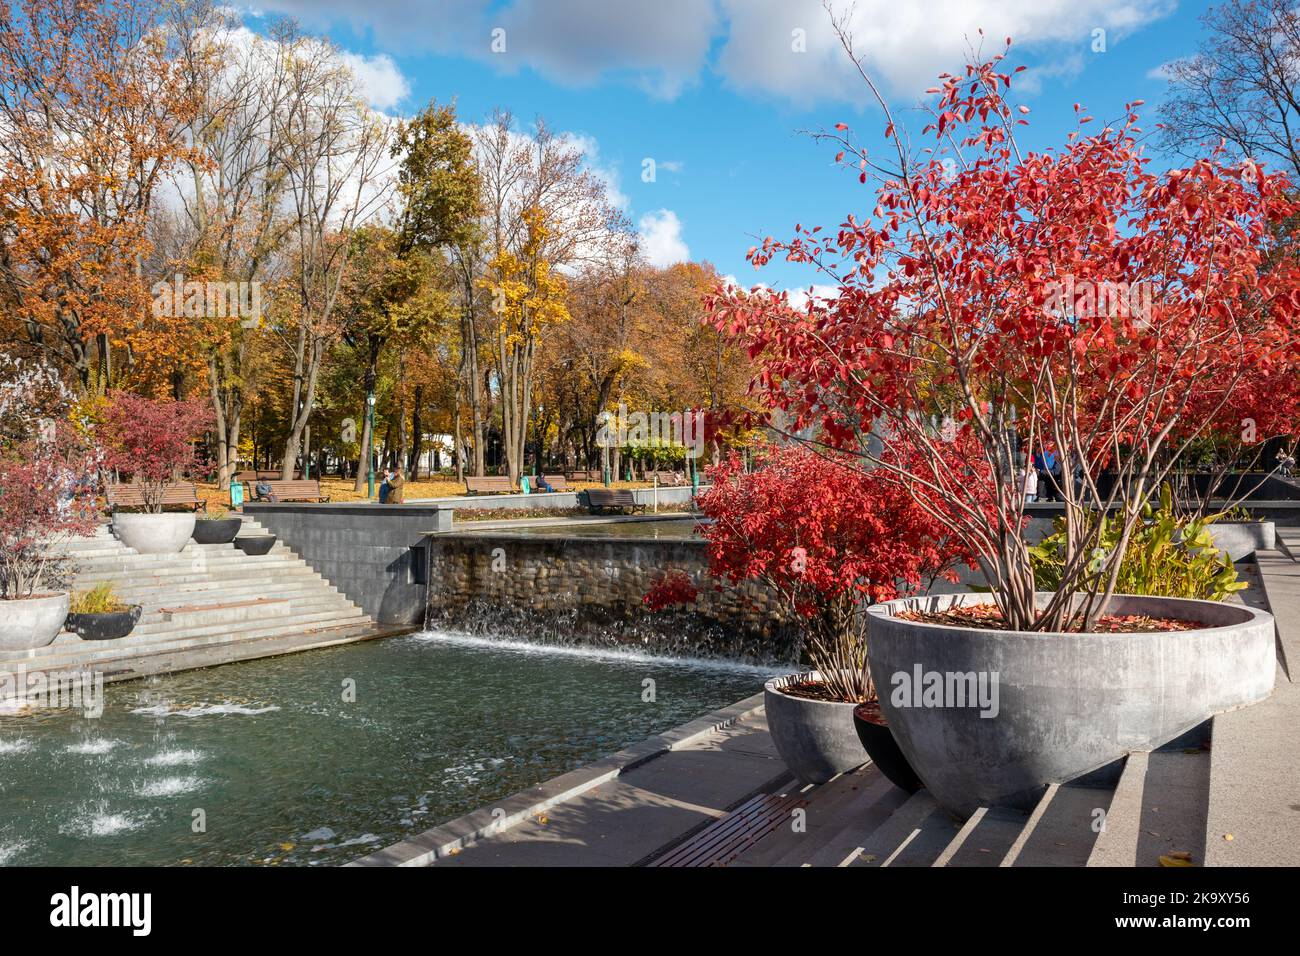 Cascade fountains waterfall in Shevchenko City Garden with red autumn trees. Tourist attraction in central city park, Kharkiv Ukraine Stock Photo